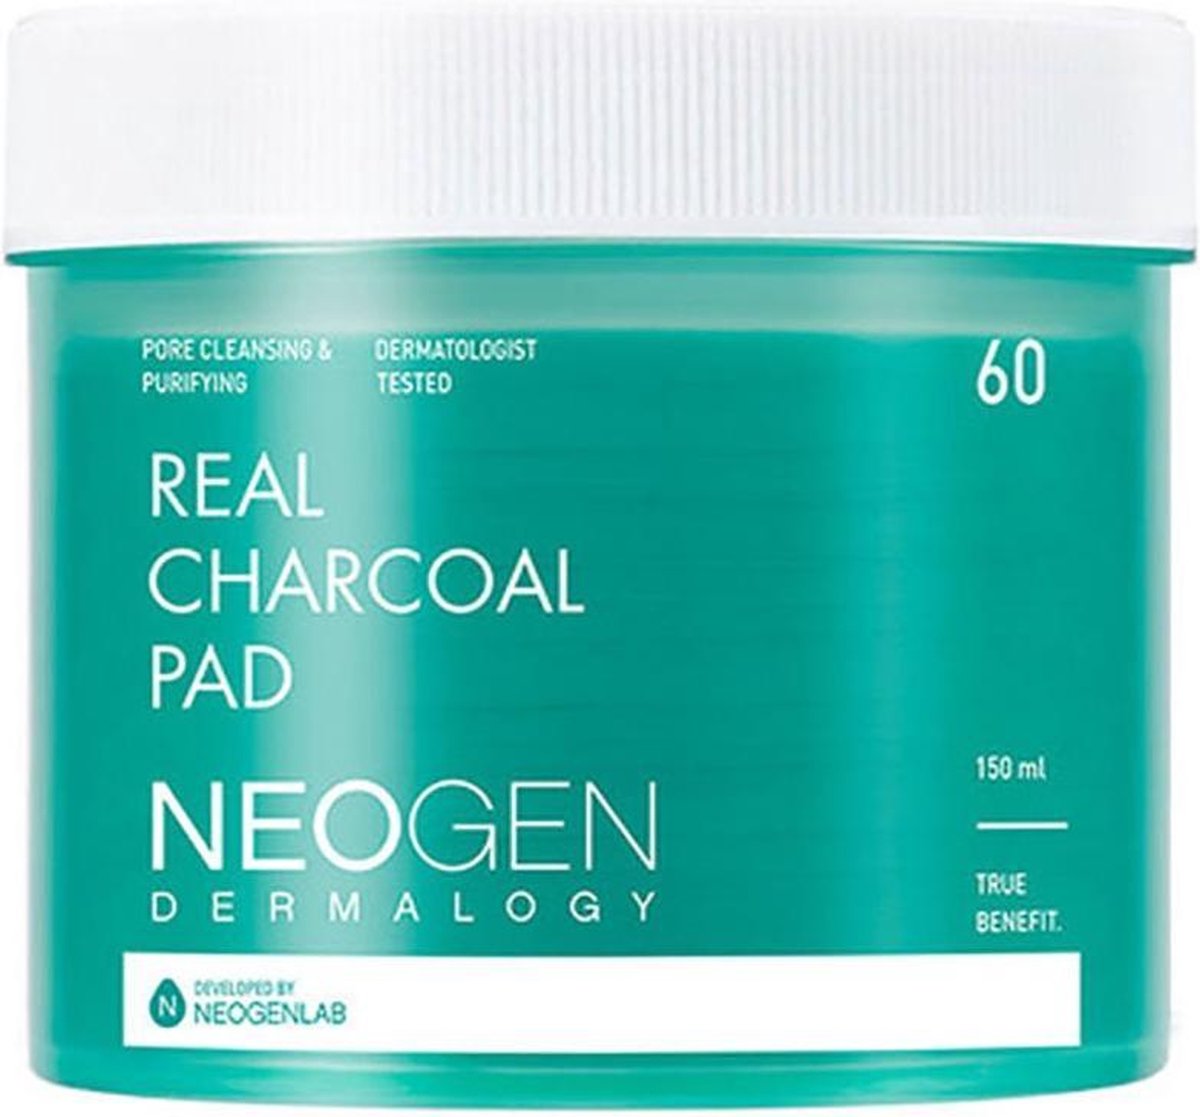 Real Charcoal Pad - Neogen Dermalogy